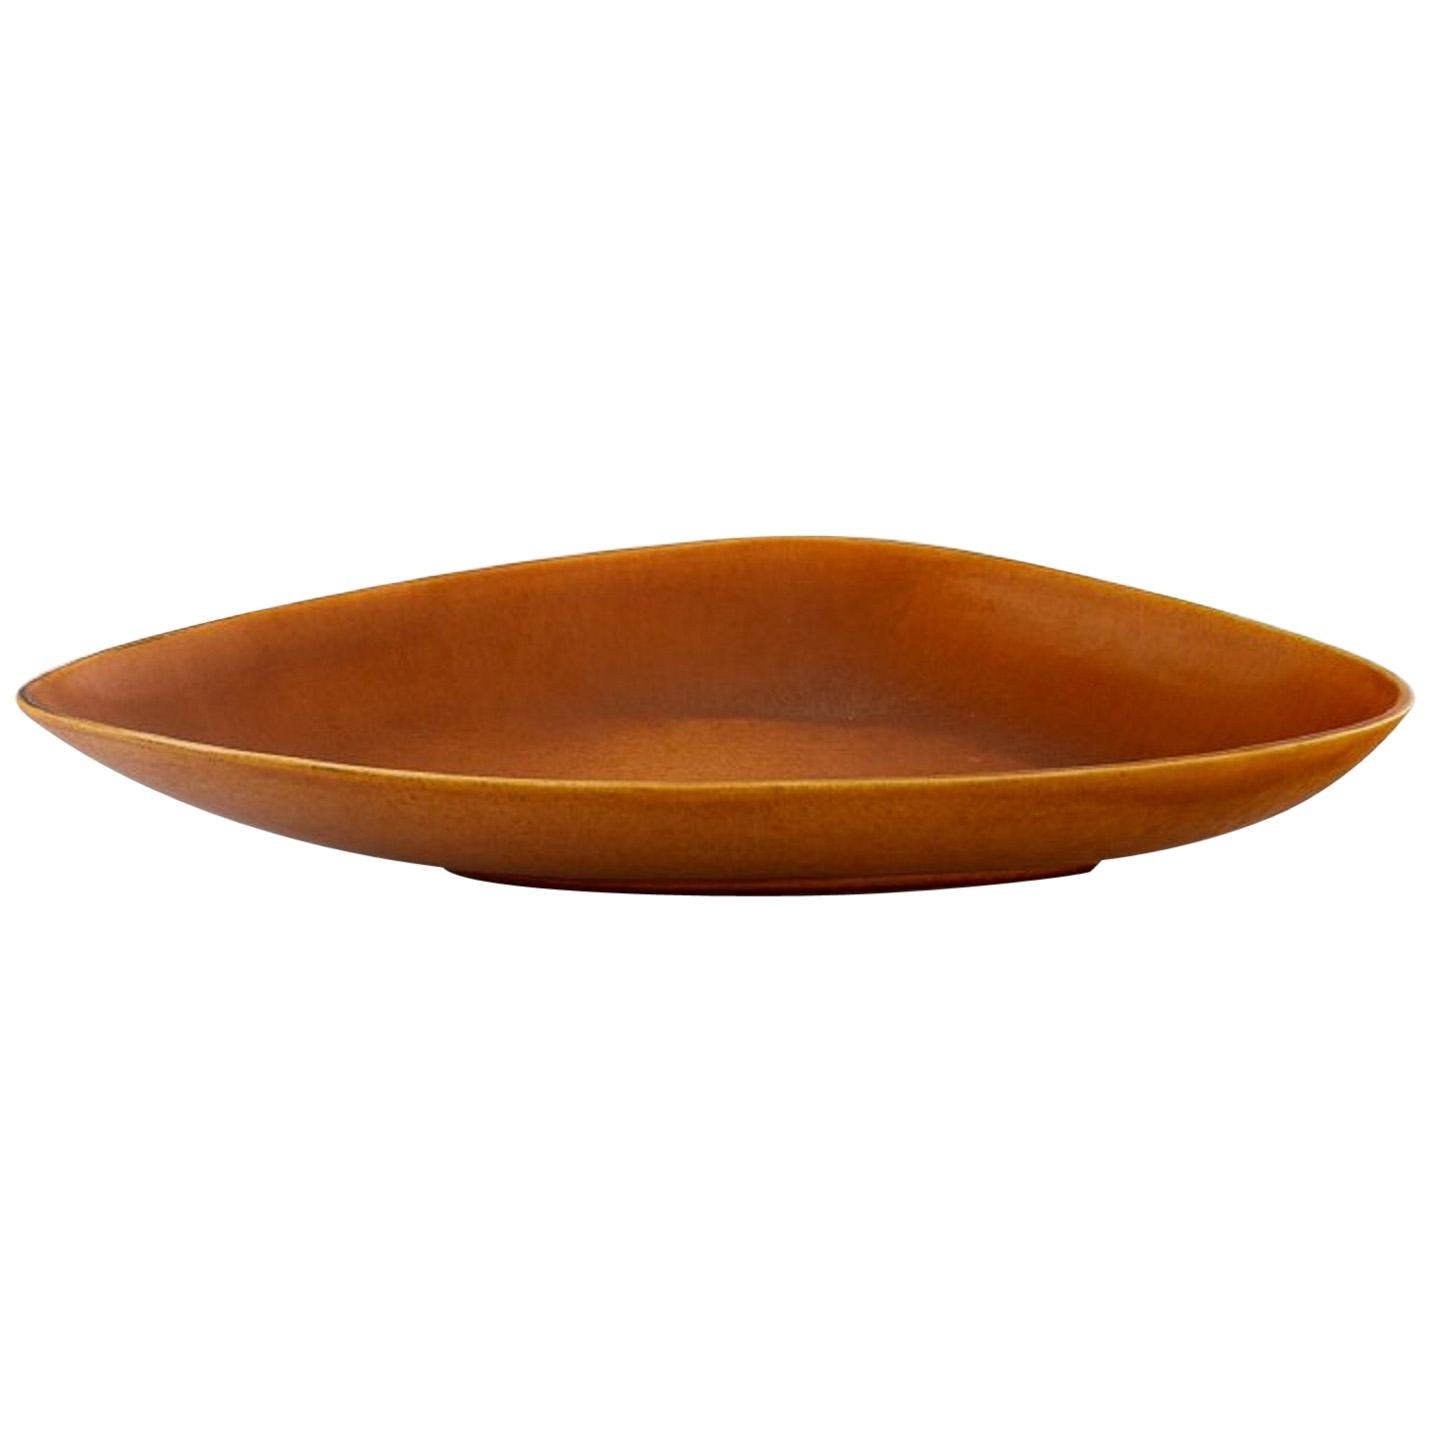 Gunnar Nylund for Nymølle, Large Triangular Dish in Glazed Ceramics, 1960s For Sale